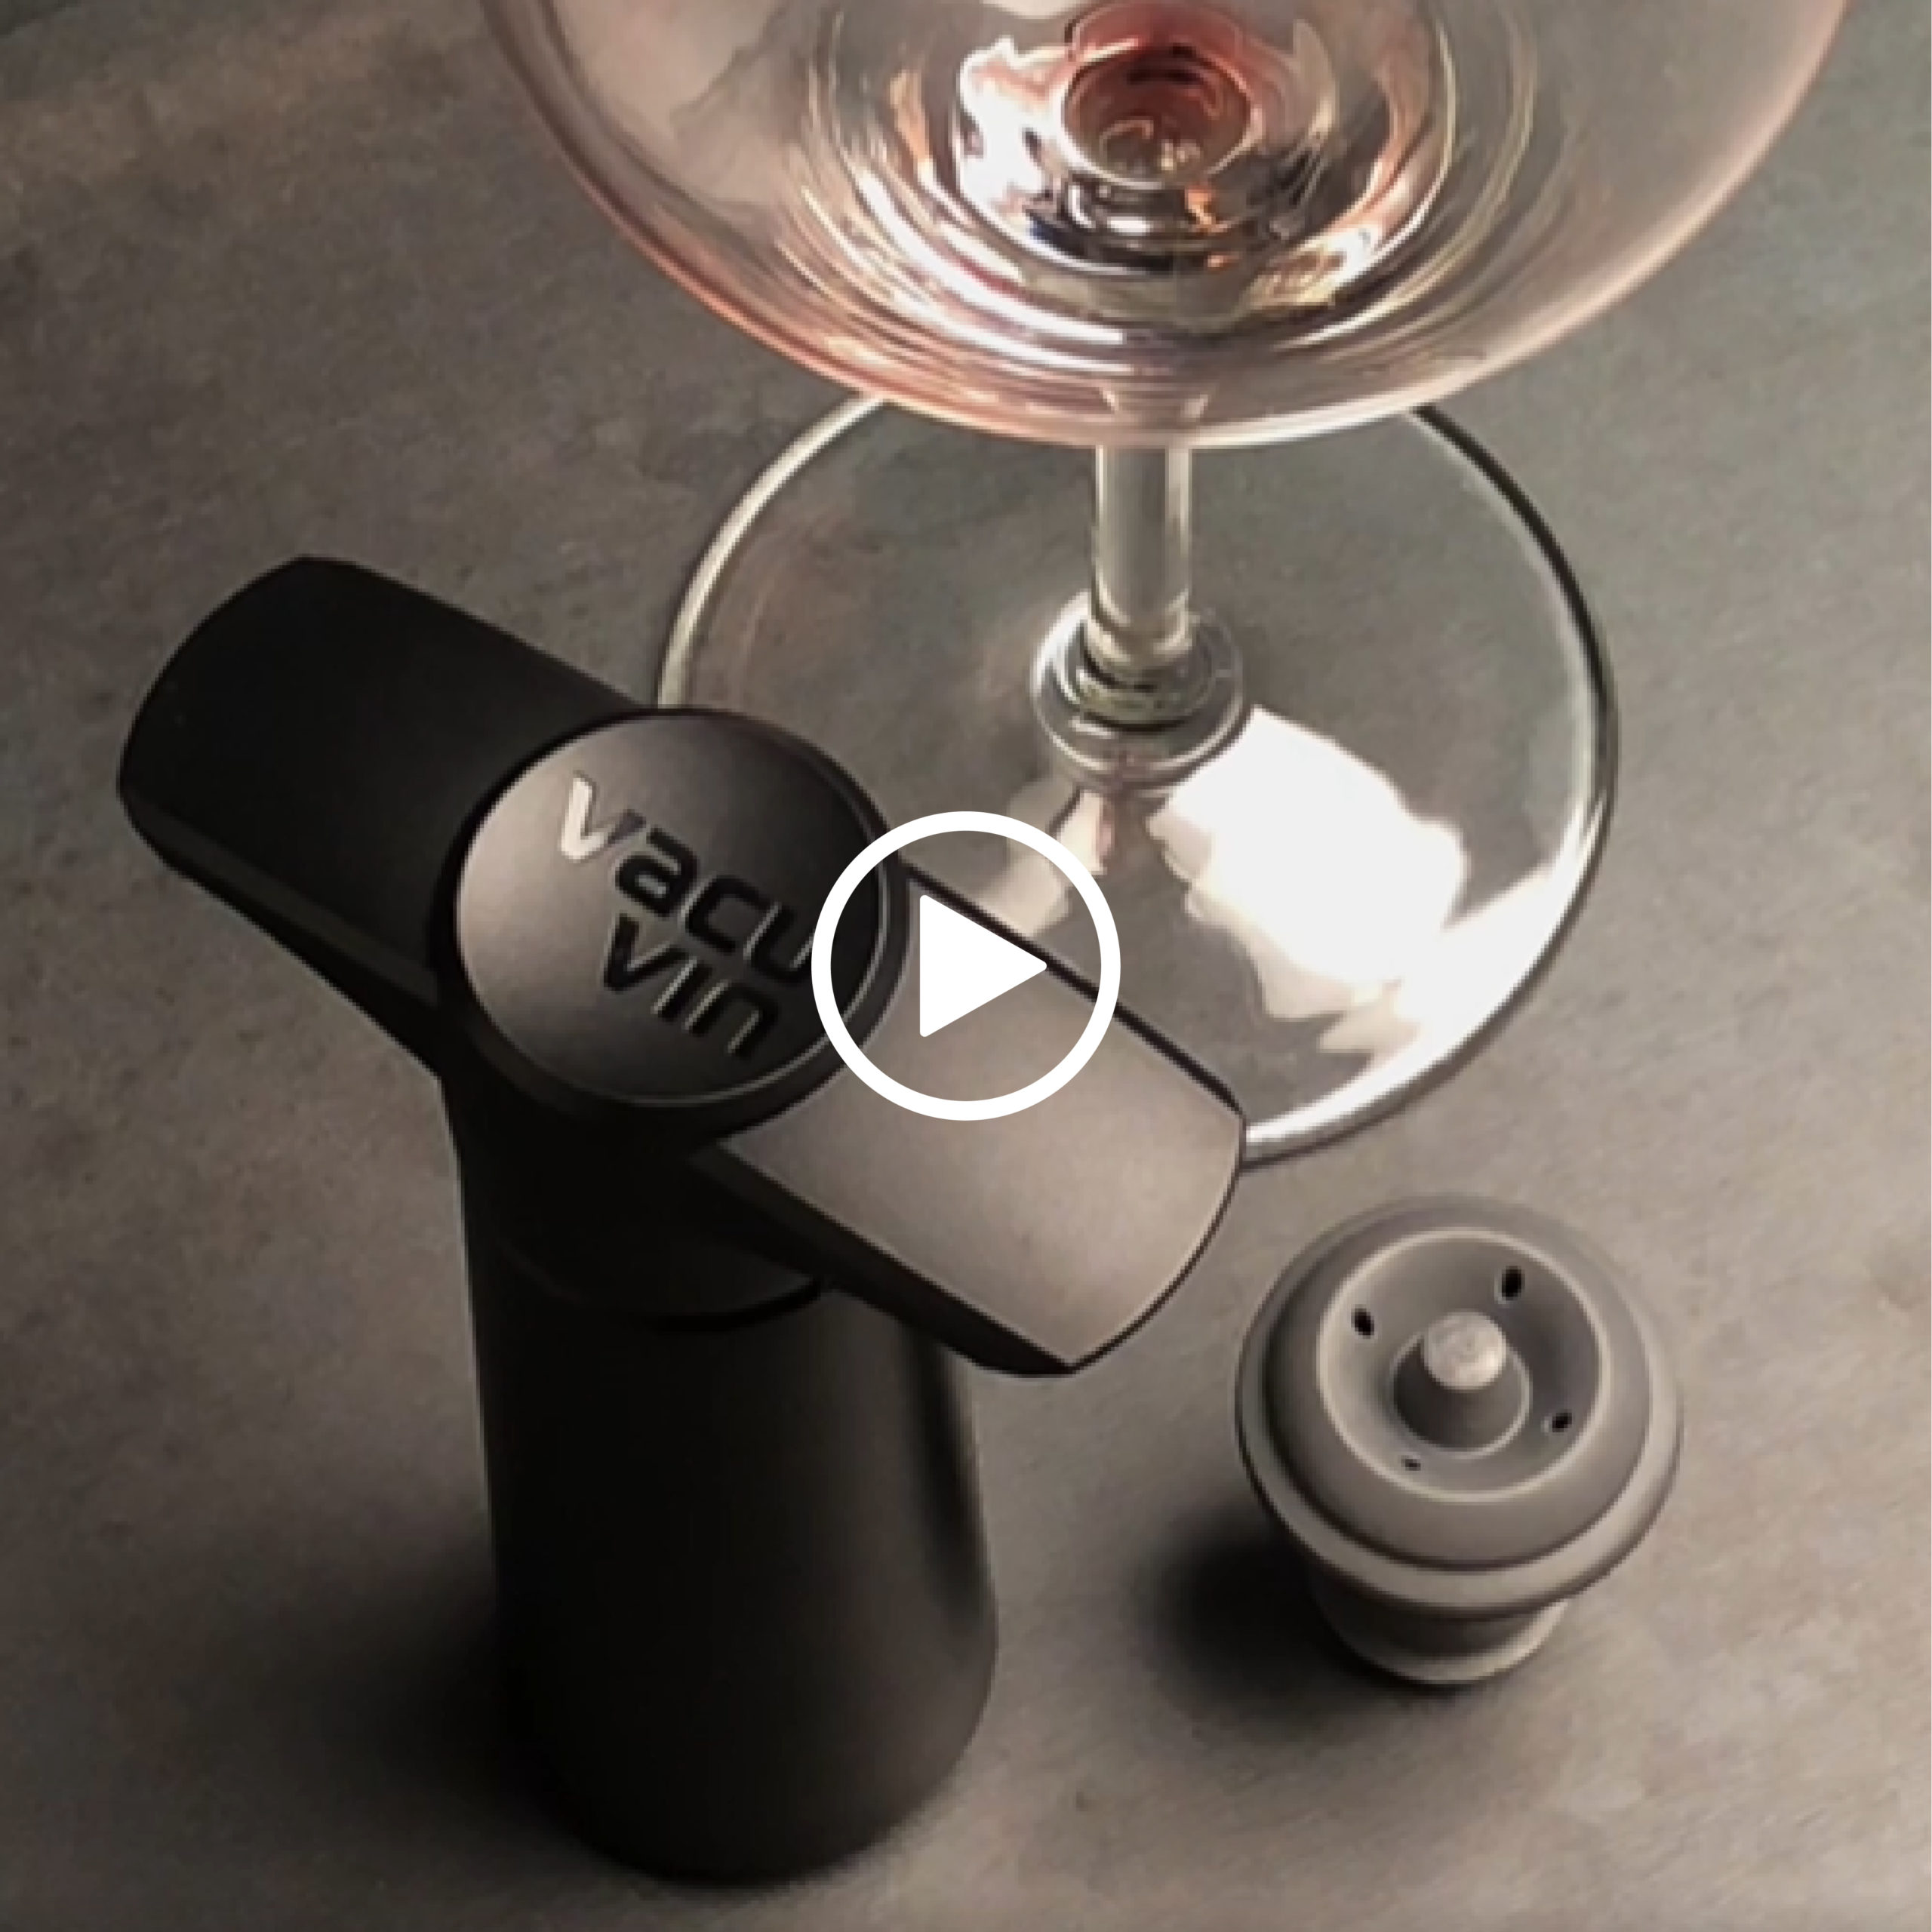 Vacu Vin Wine Saver Pump Black with Vacuum Wine Stopper - Keep Your Wine  Fresh for up to 10 Days - 1 Pump 4 Stoppers - Reusable - Made in the